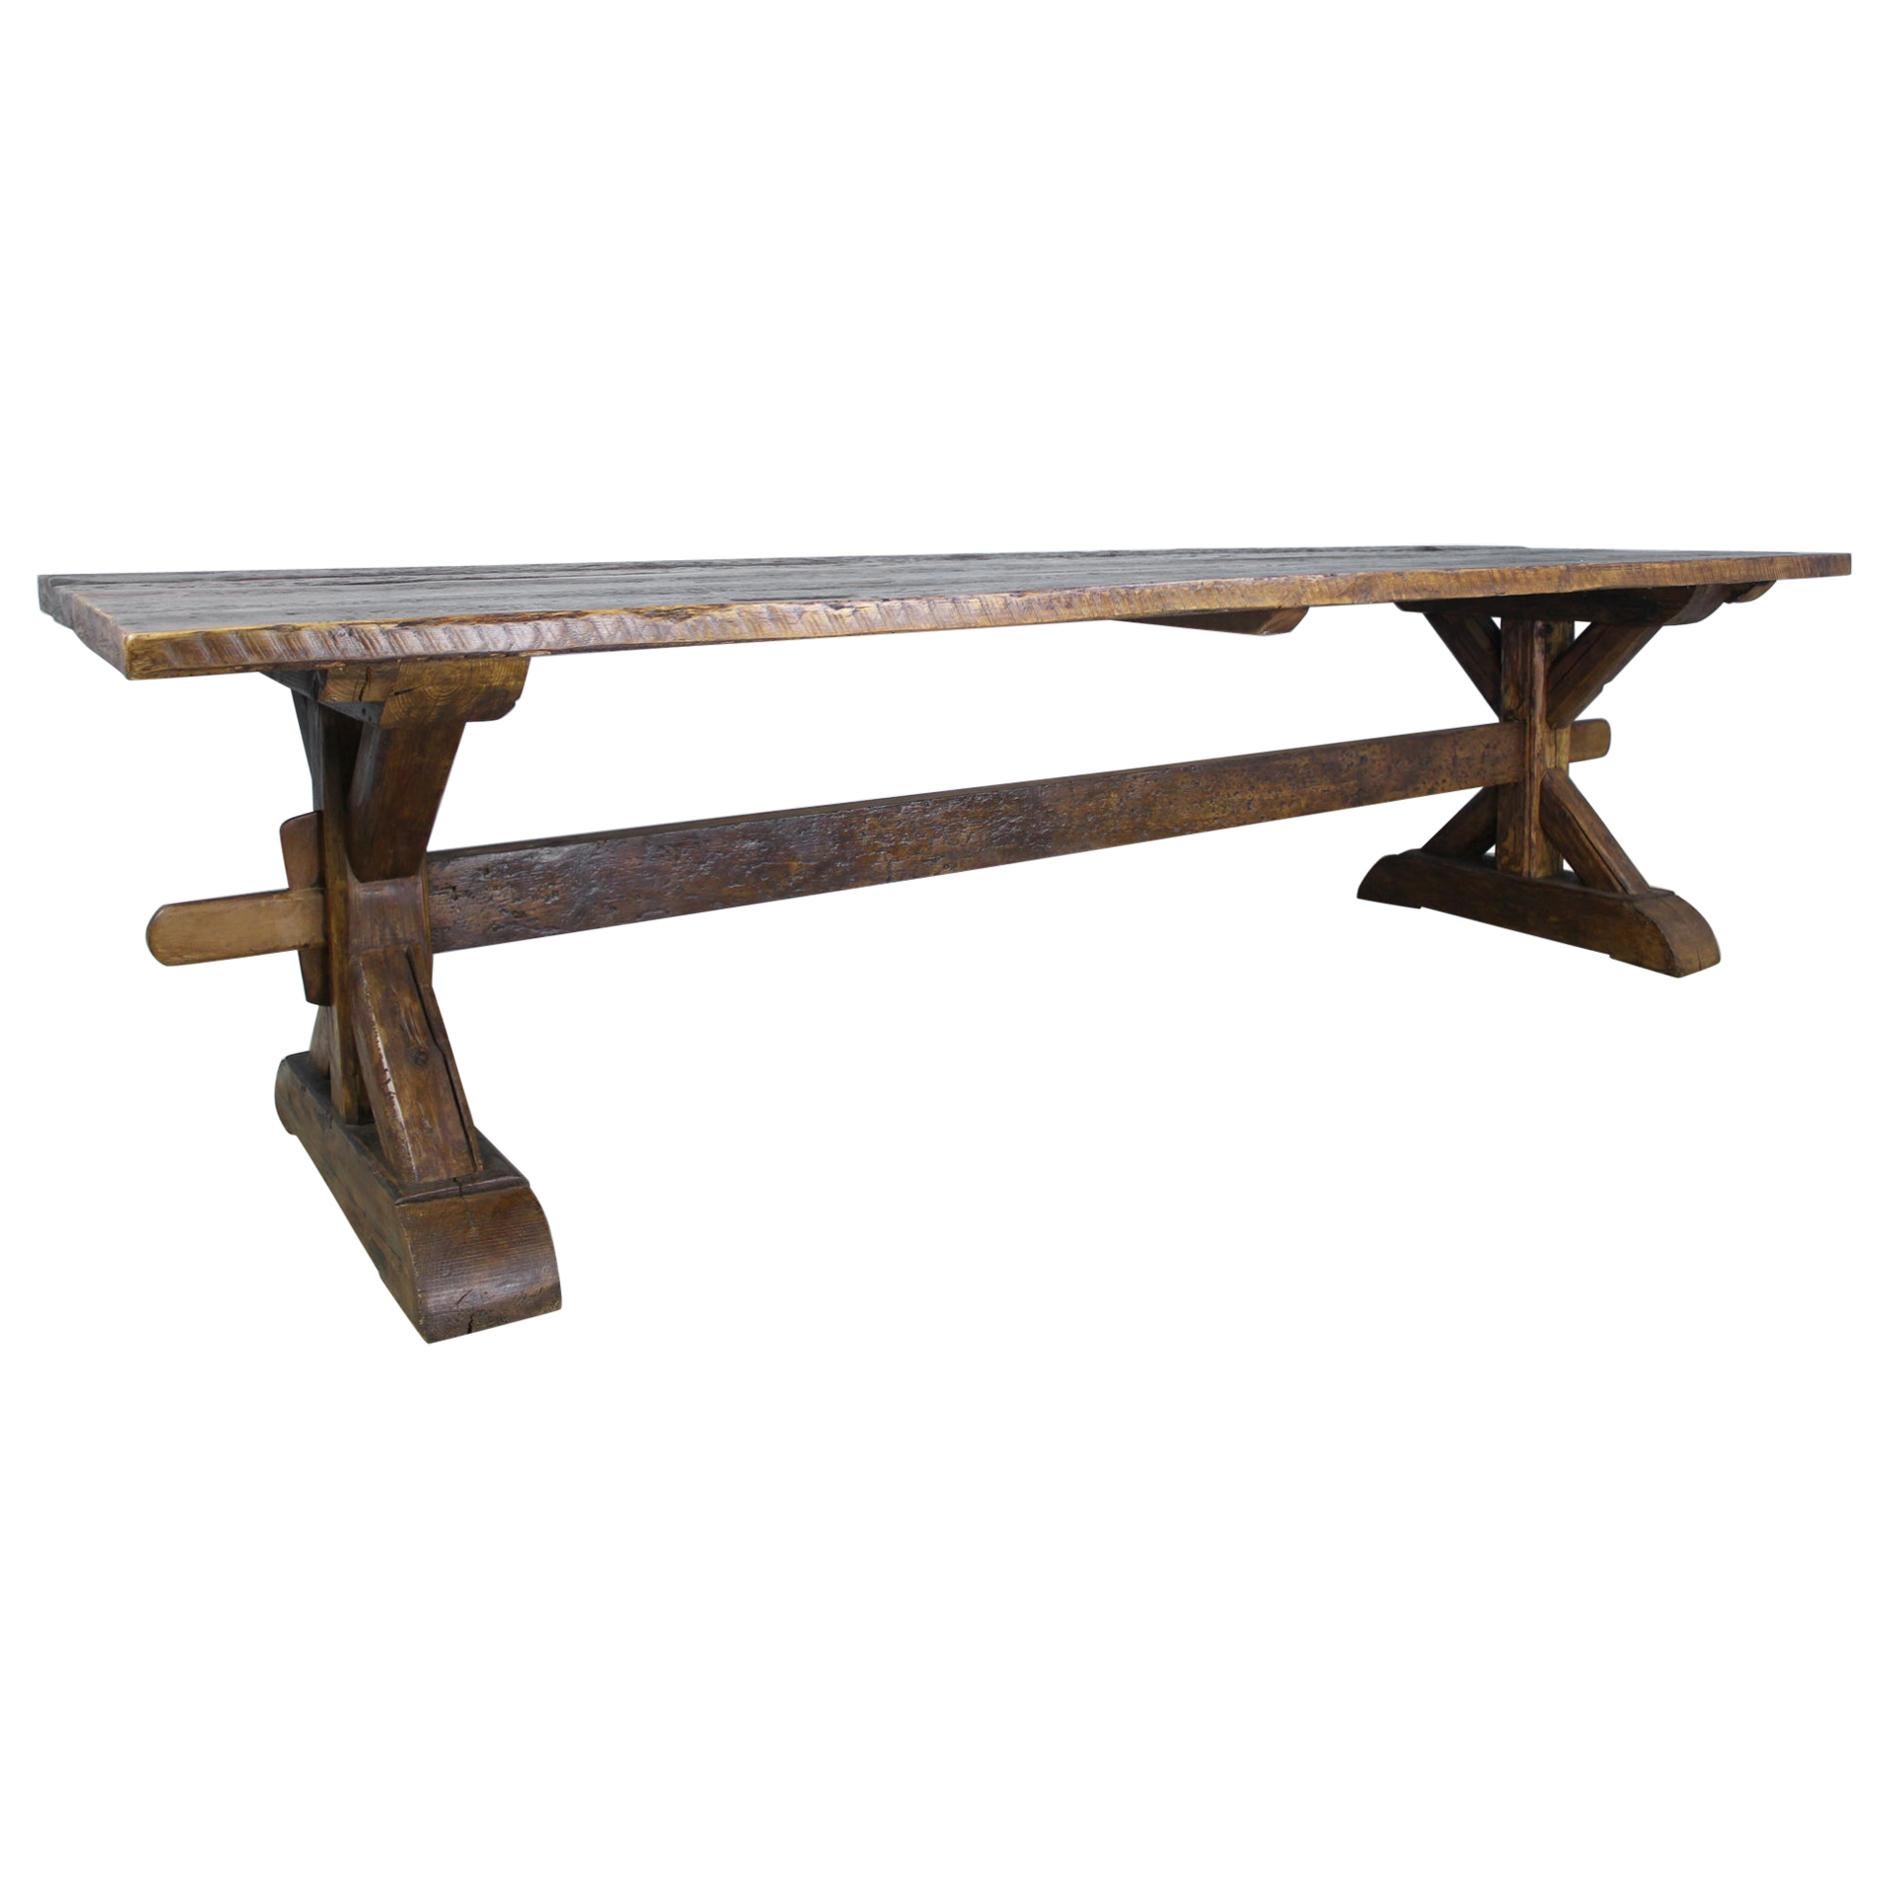 Very Long French Pine Refectory Table with Trestle Base